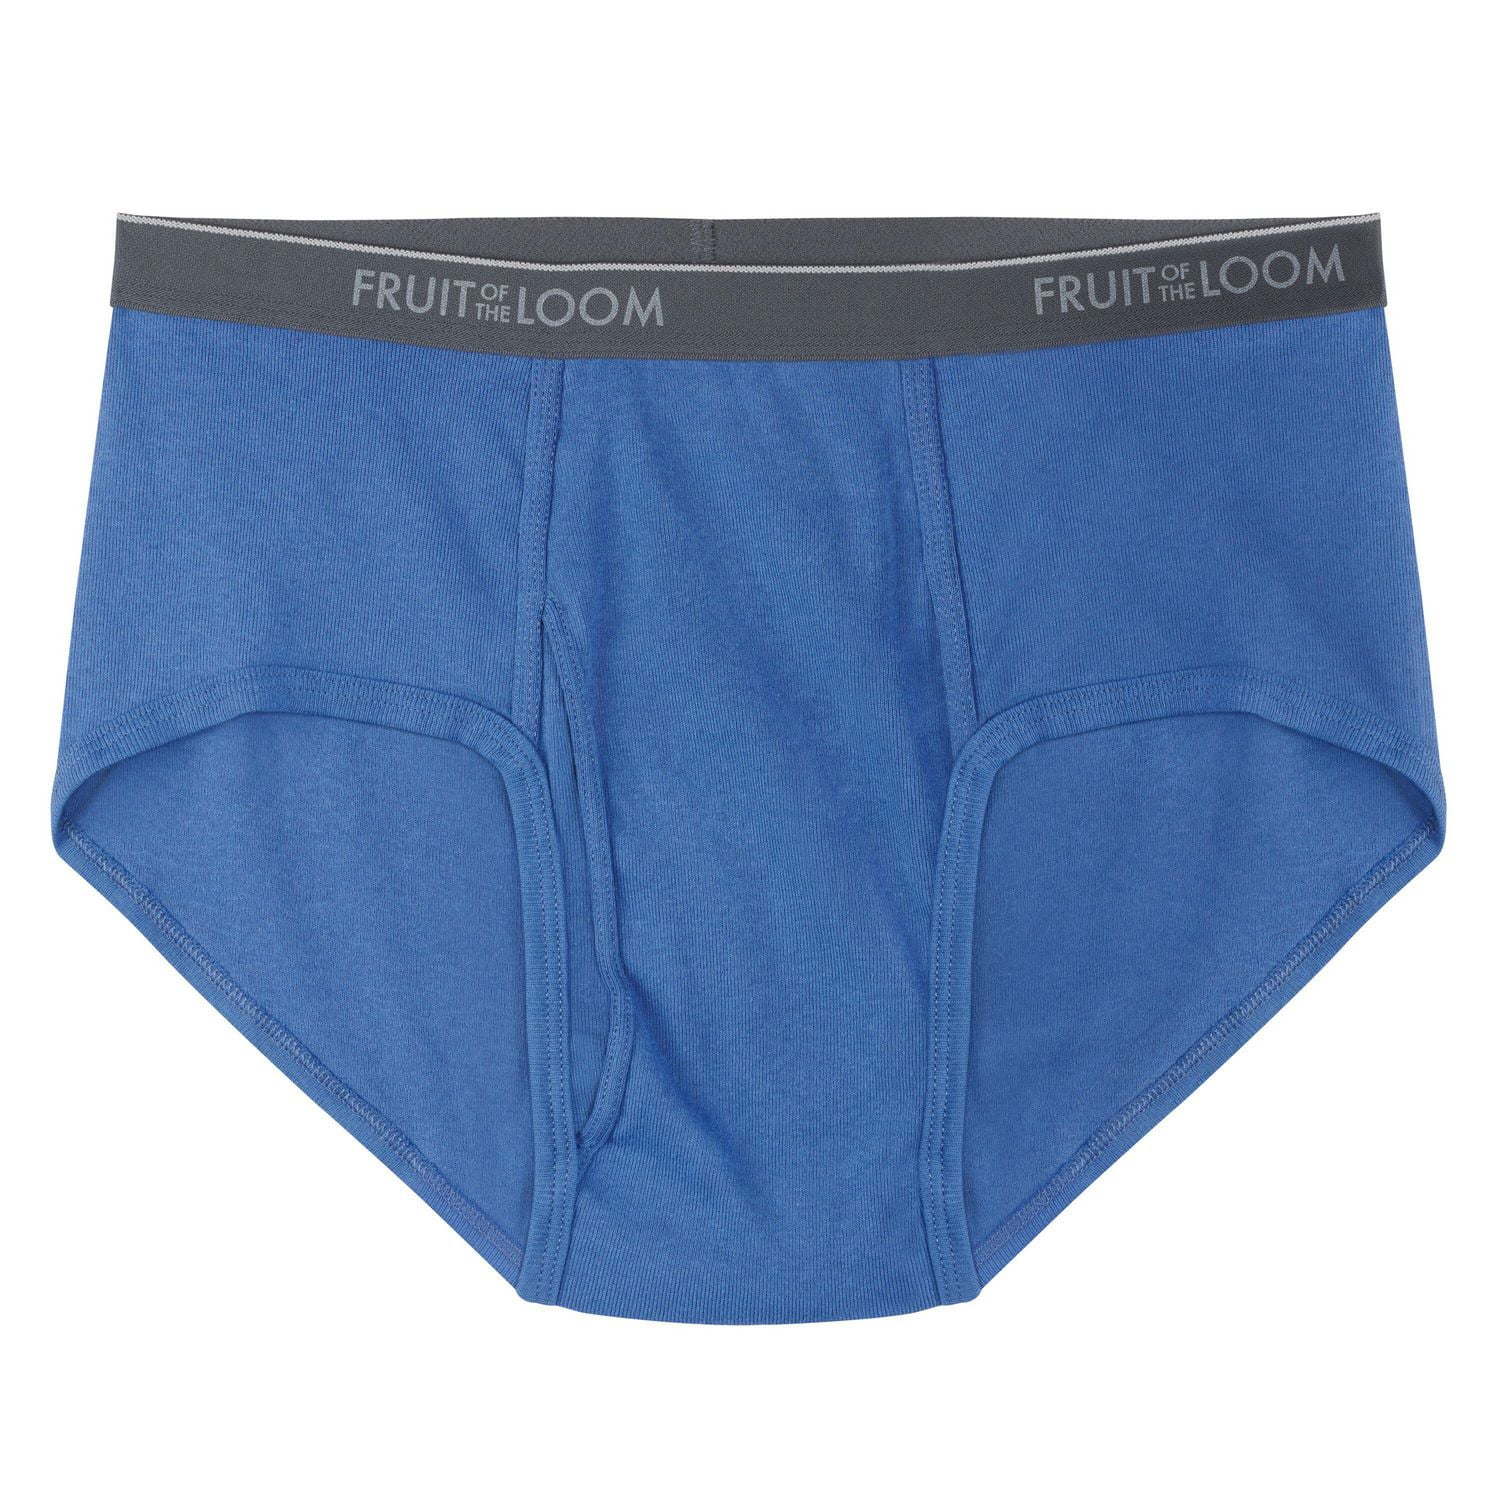 Fruit of the Loom Men's Beyond Soft Tagless Fashion Briefs (Value Packs)